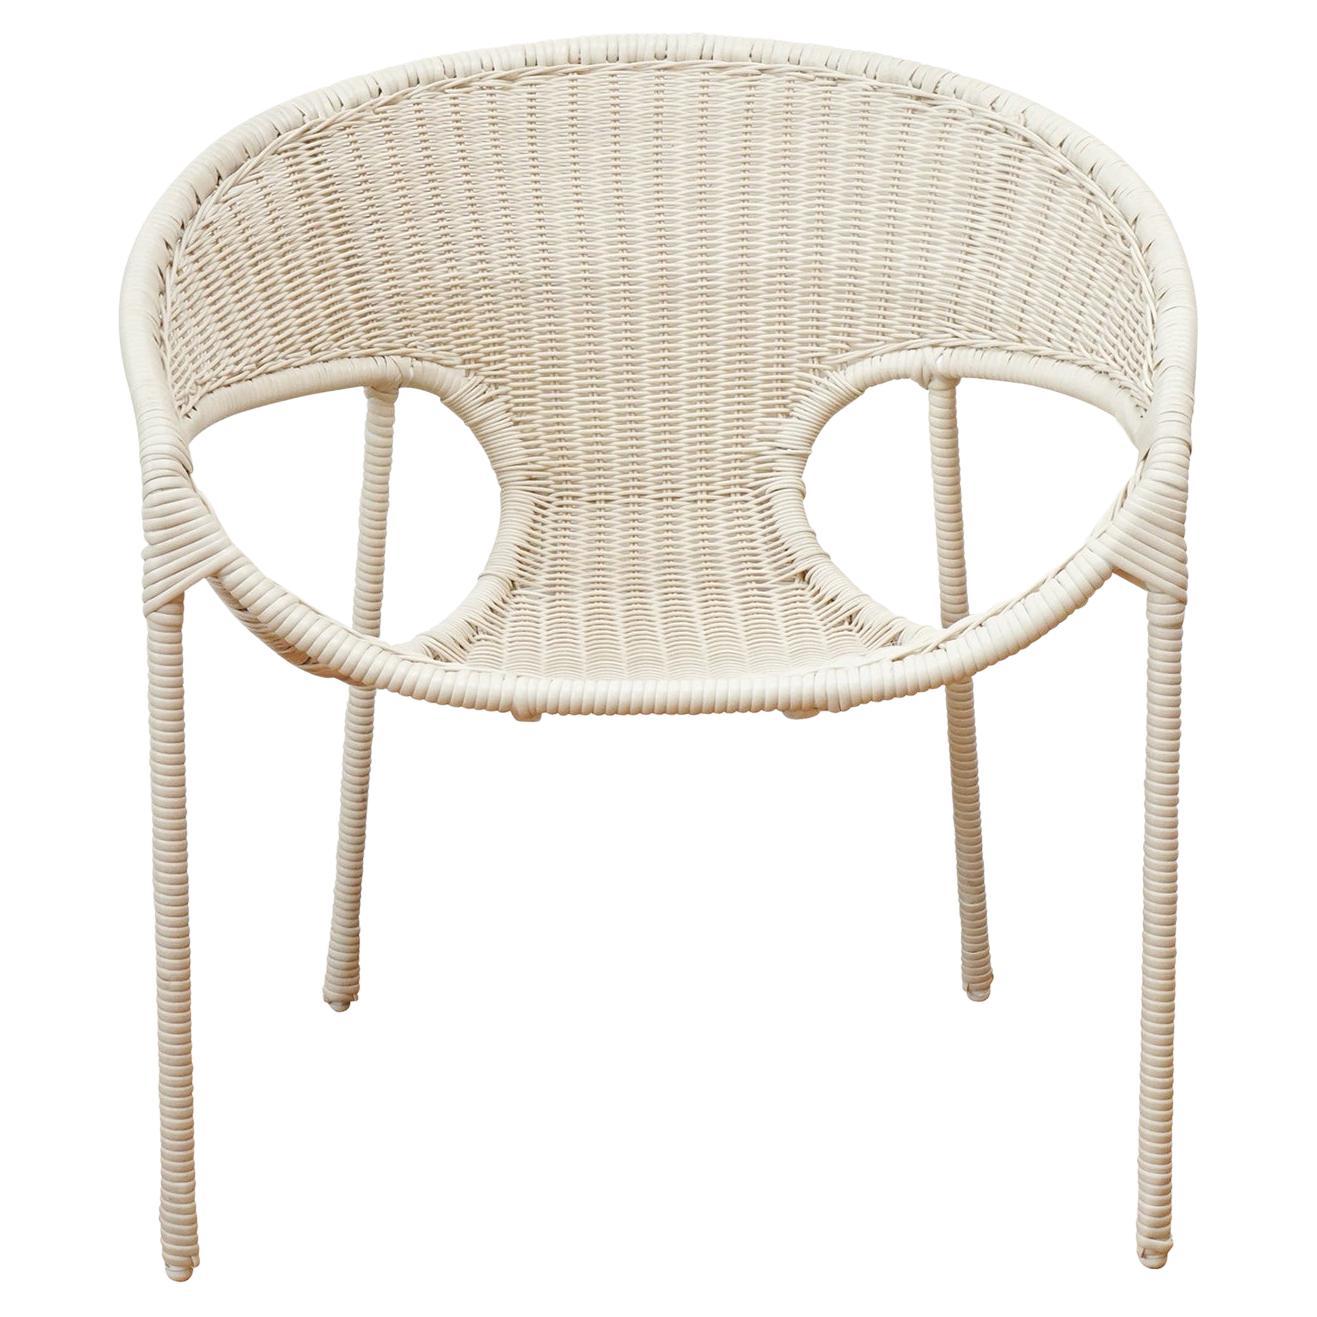 Tulum Outdoor Woven Dining Chair WHITE For Sale